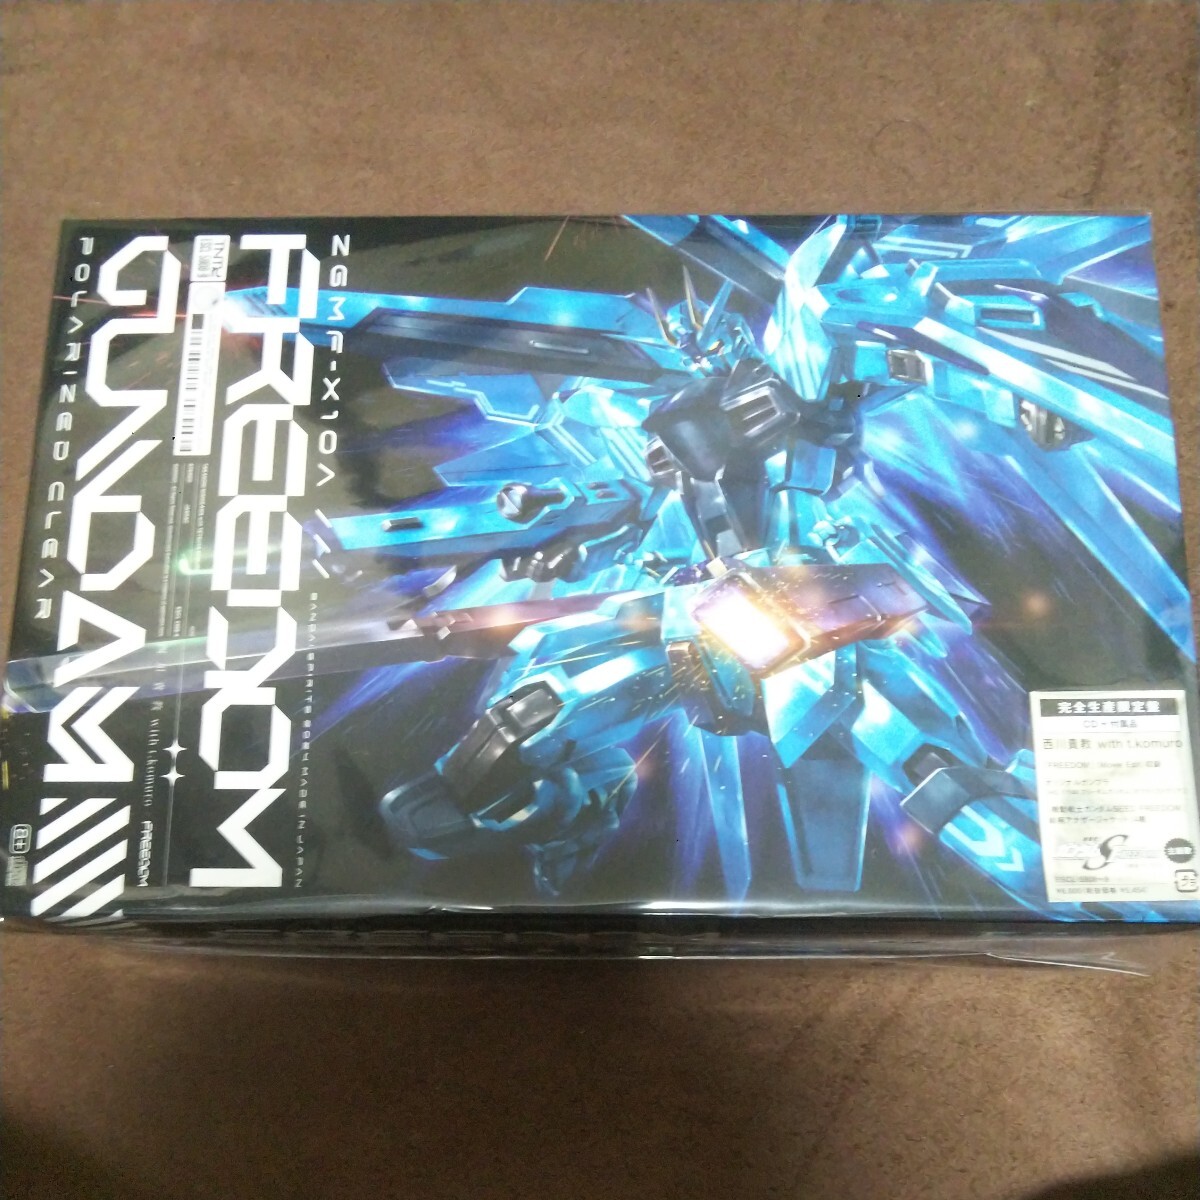 CD FREEDOM west river ..with komuro freedom Gundam polalaizdo clear attached 